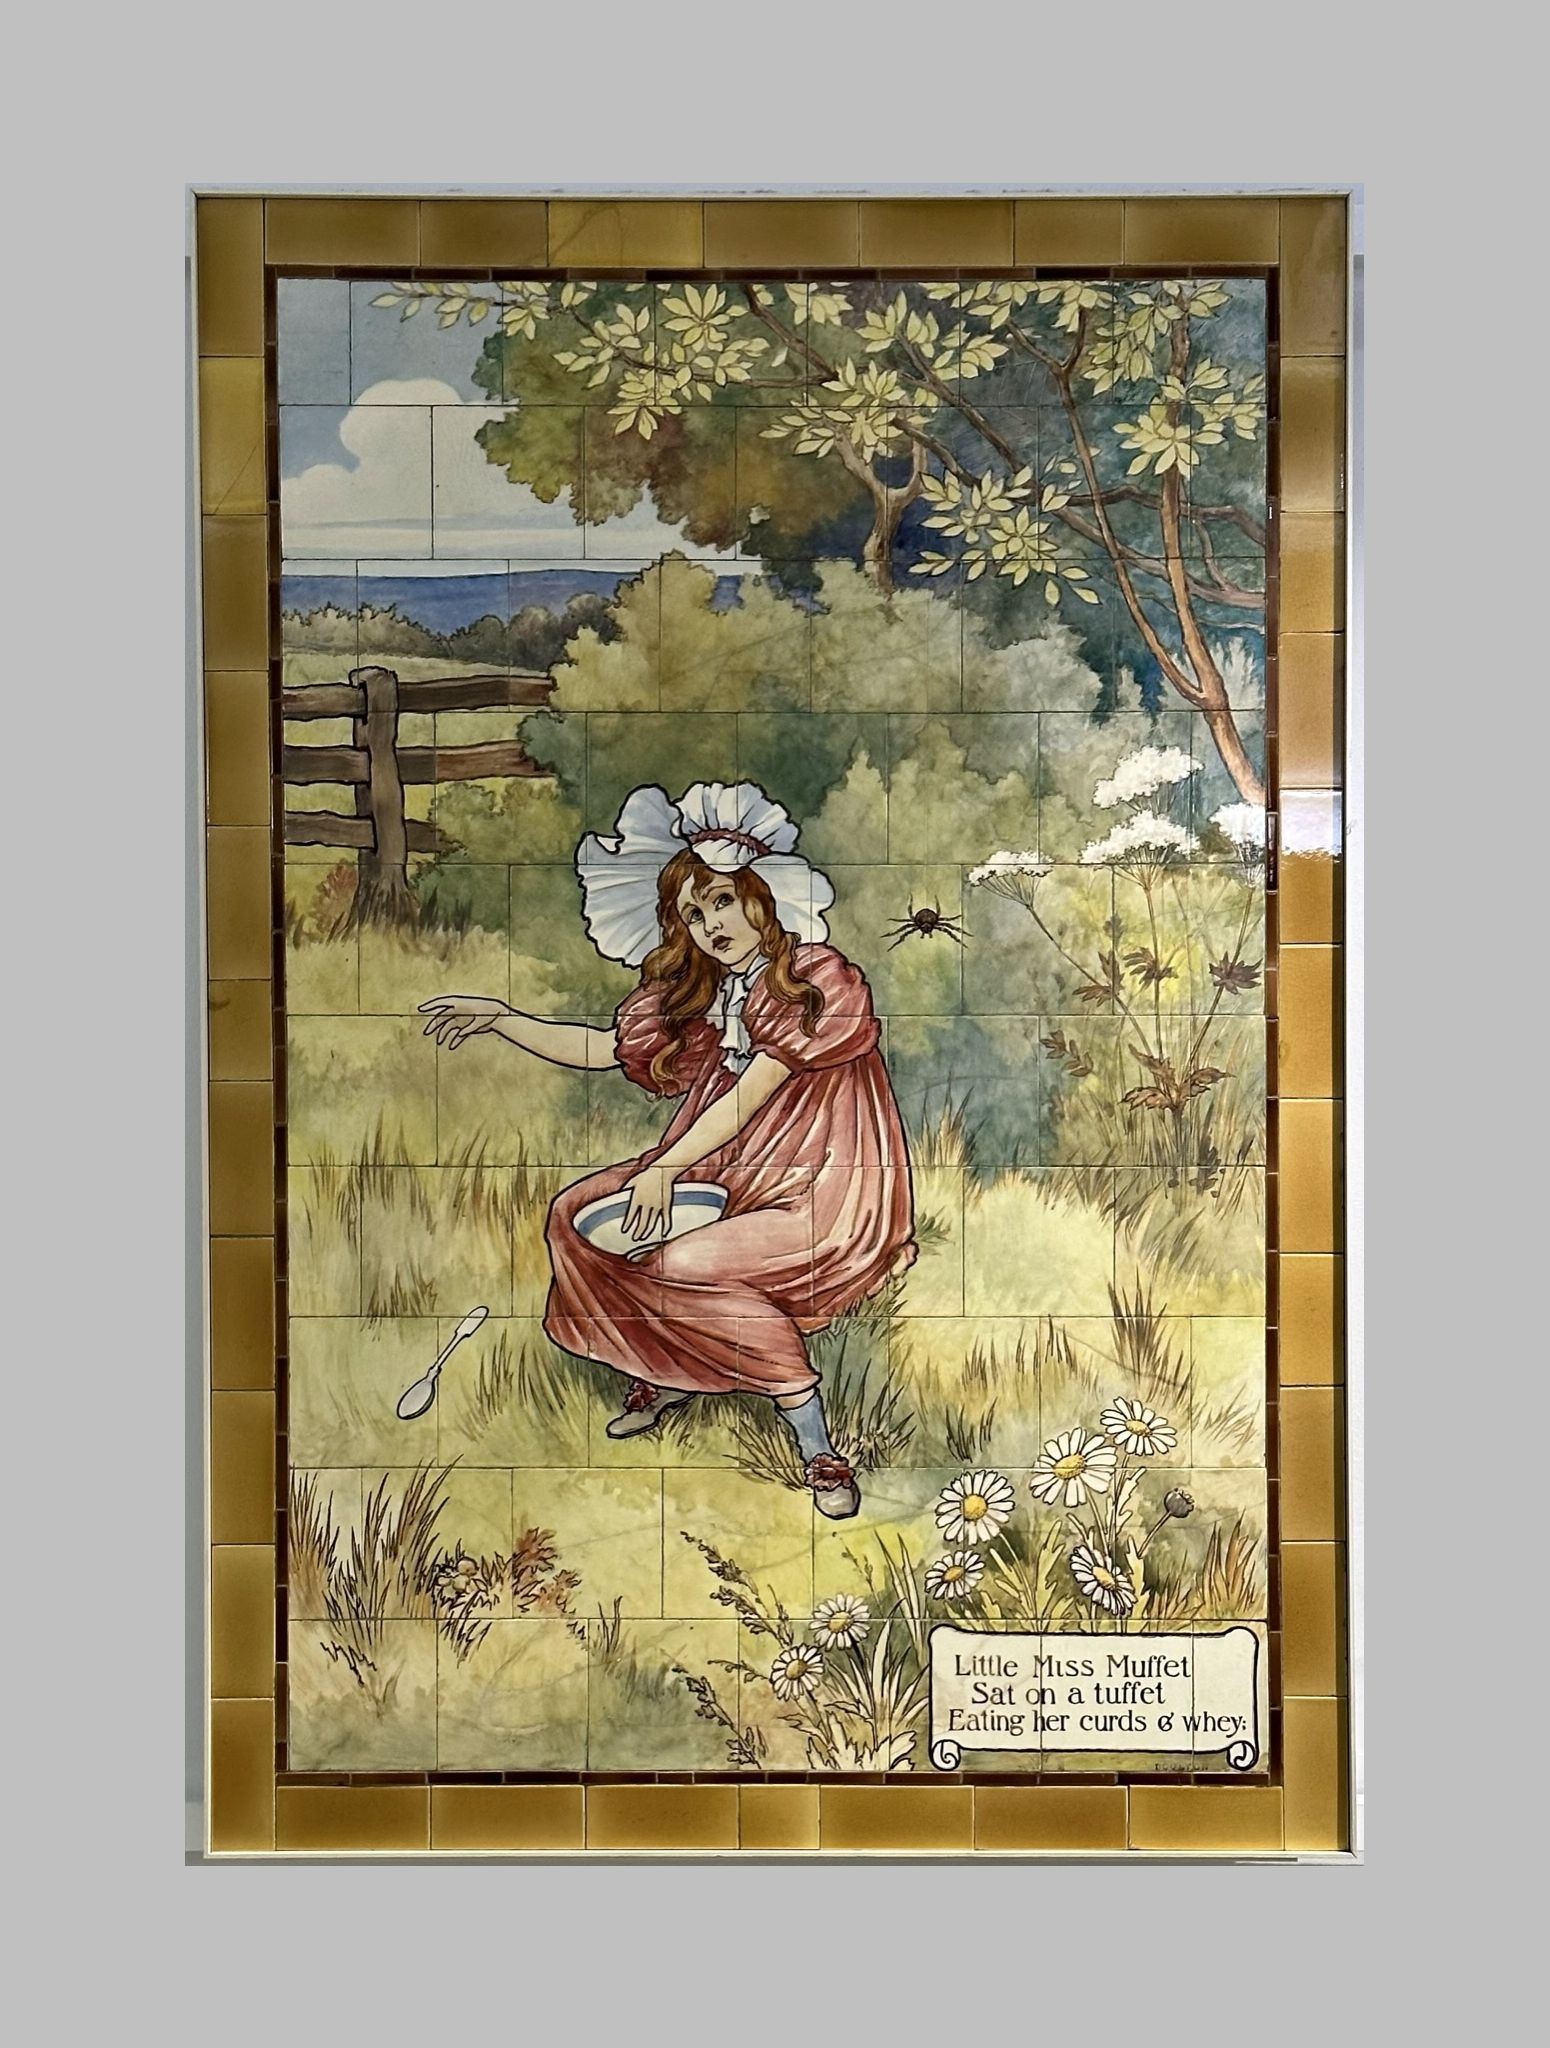 Little Miss Muffet scene painted on Doulton tiles (commissioned around 1900) from the Evelina Children's Hospital displayed in the long corridor at St Thomas' hospital.